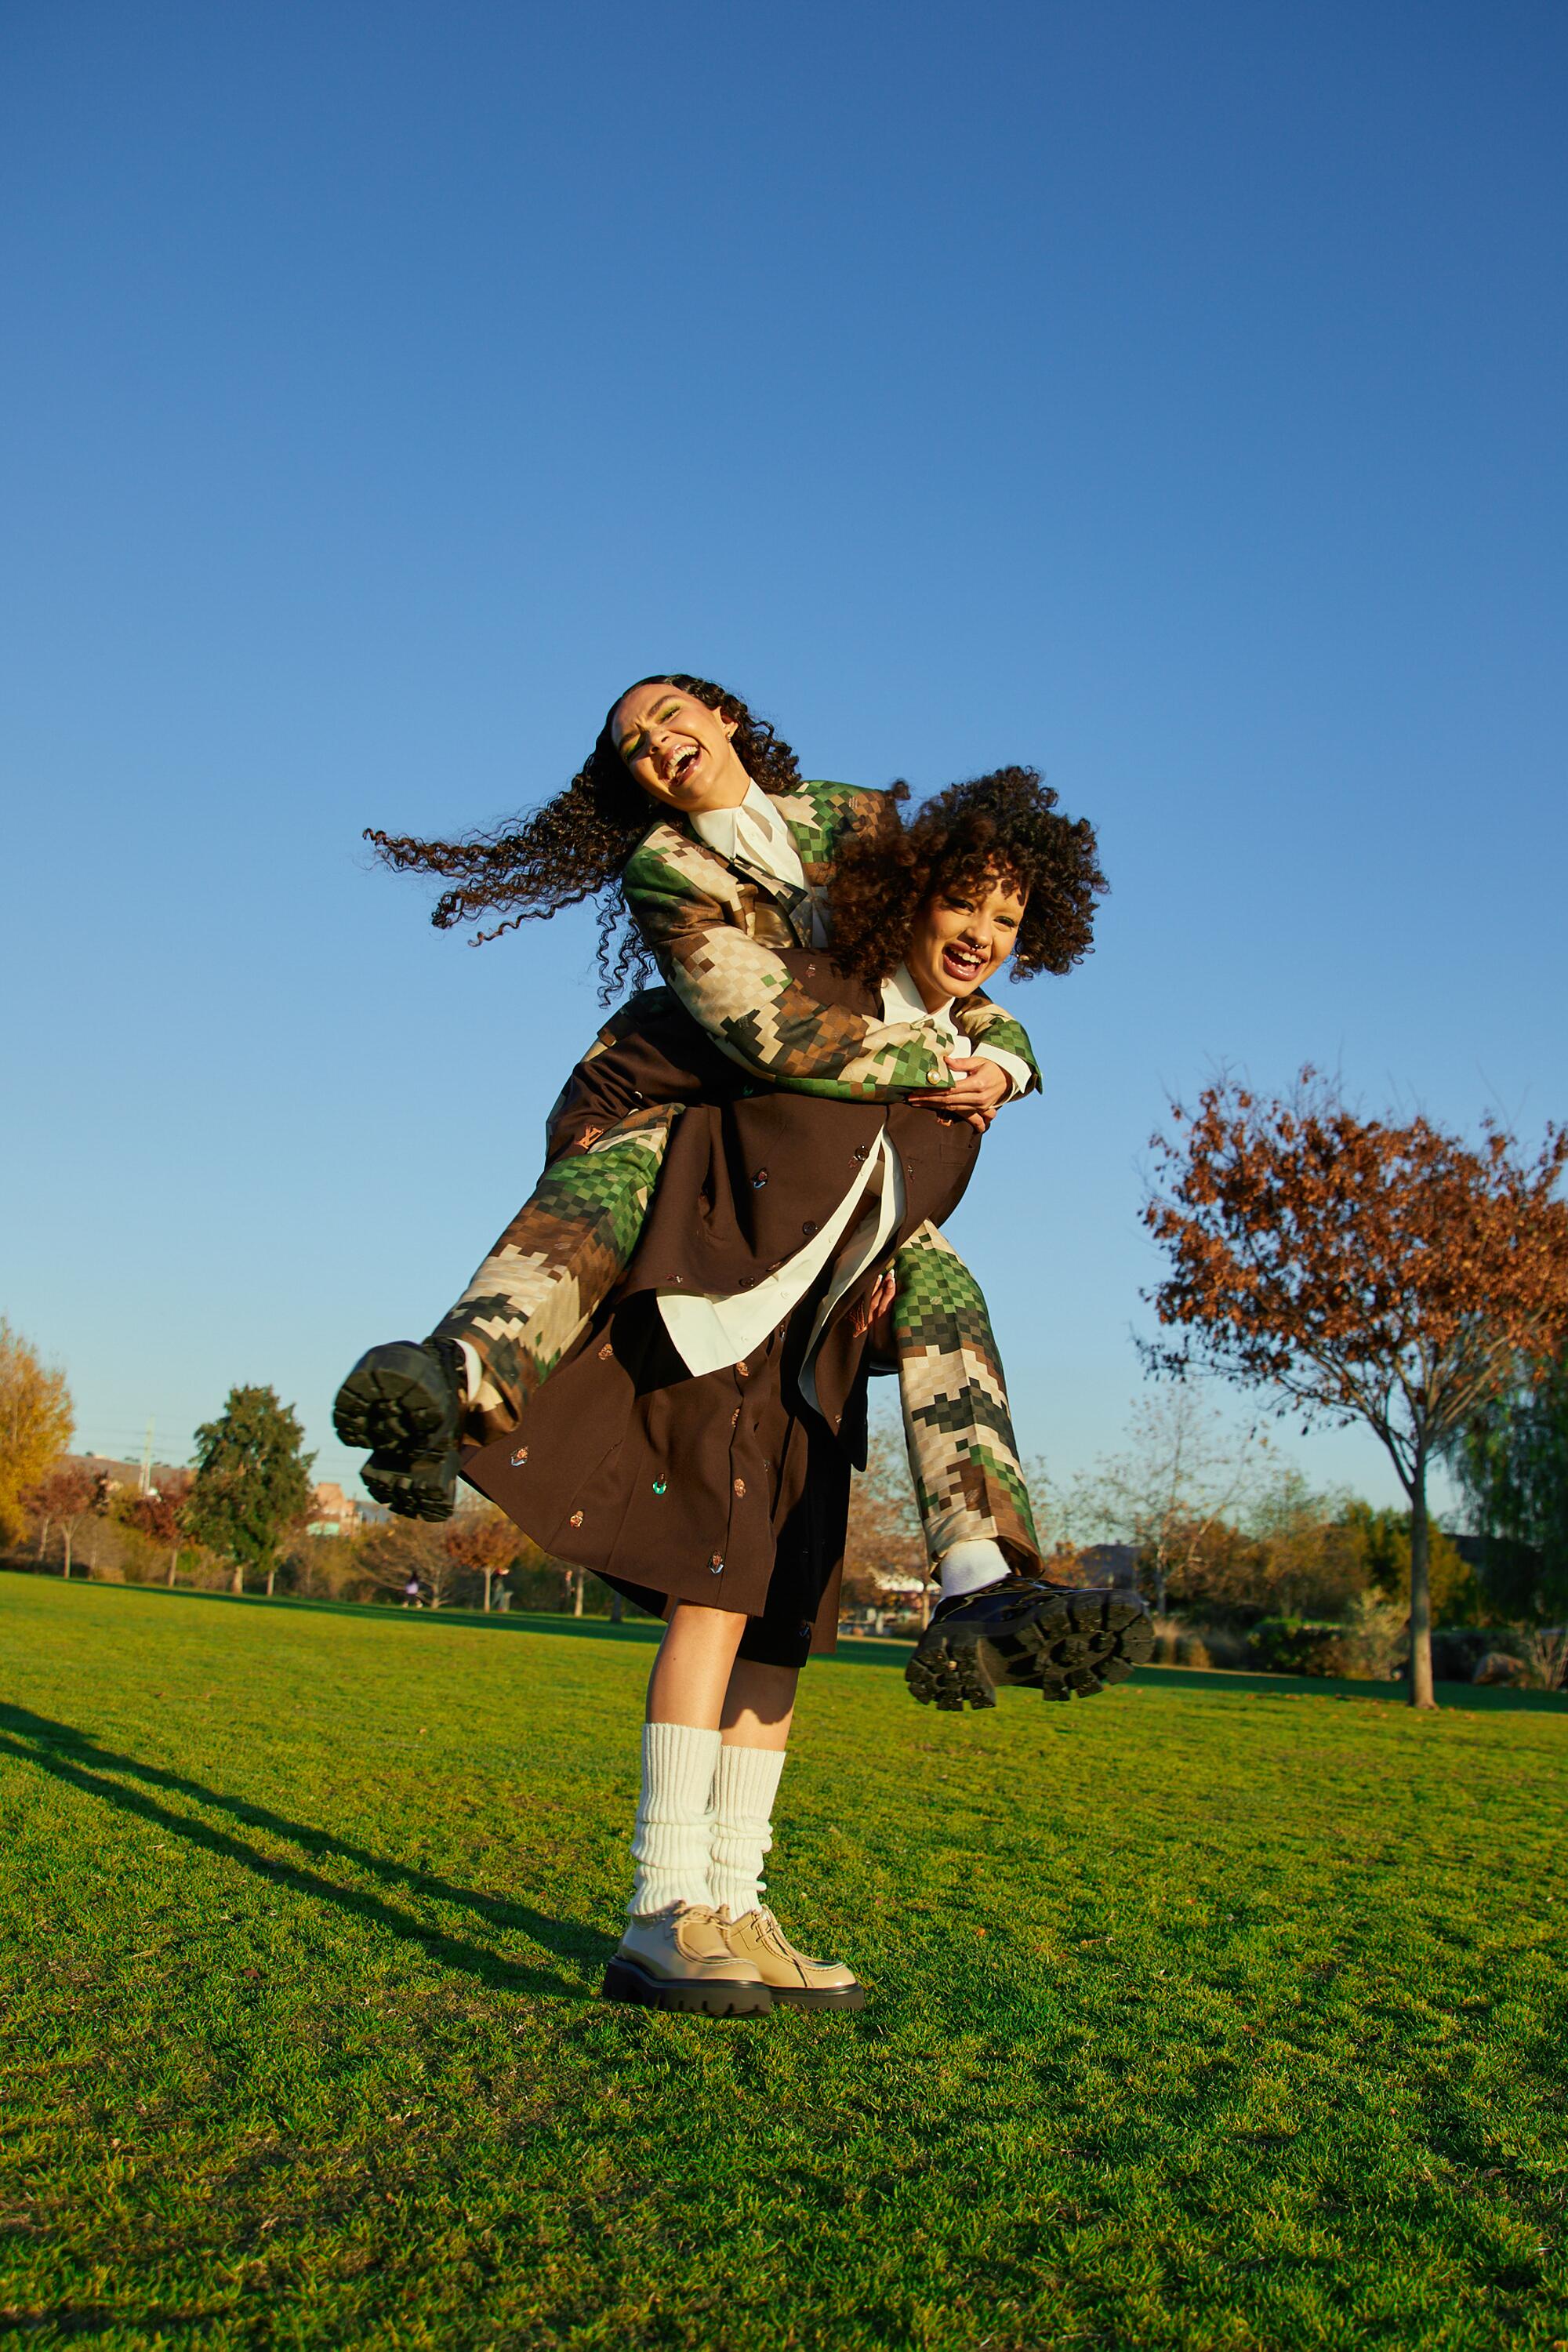 Two models embrace in a park.